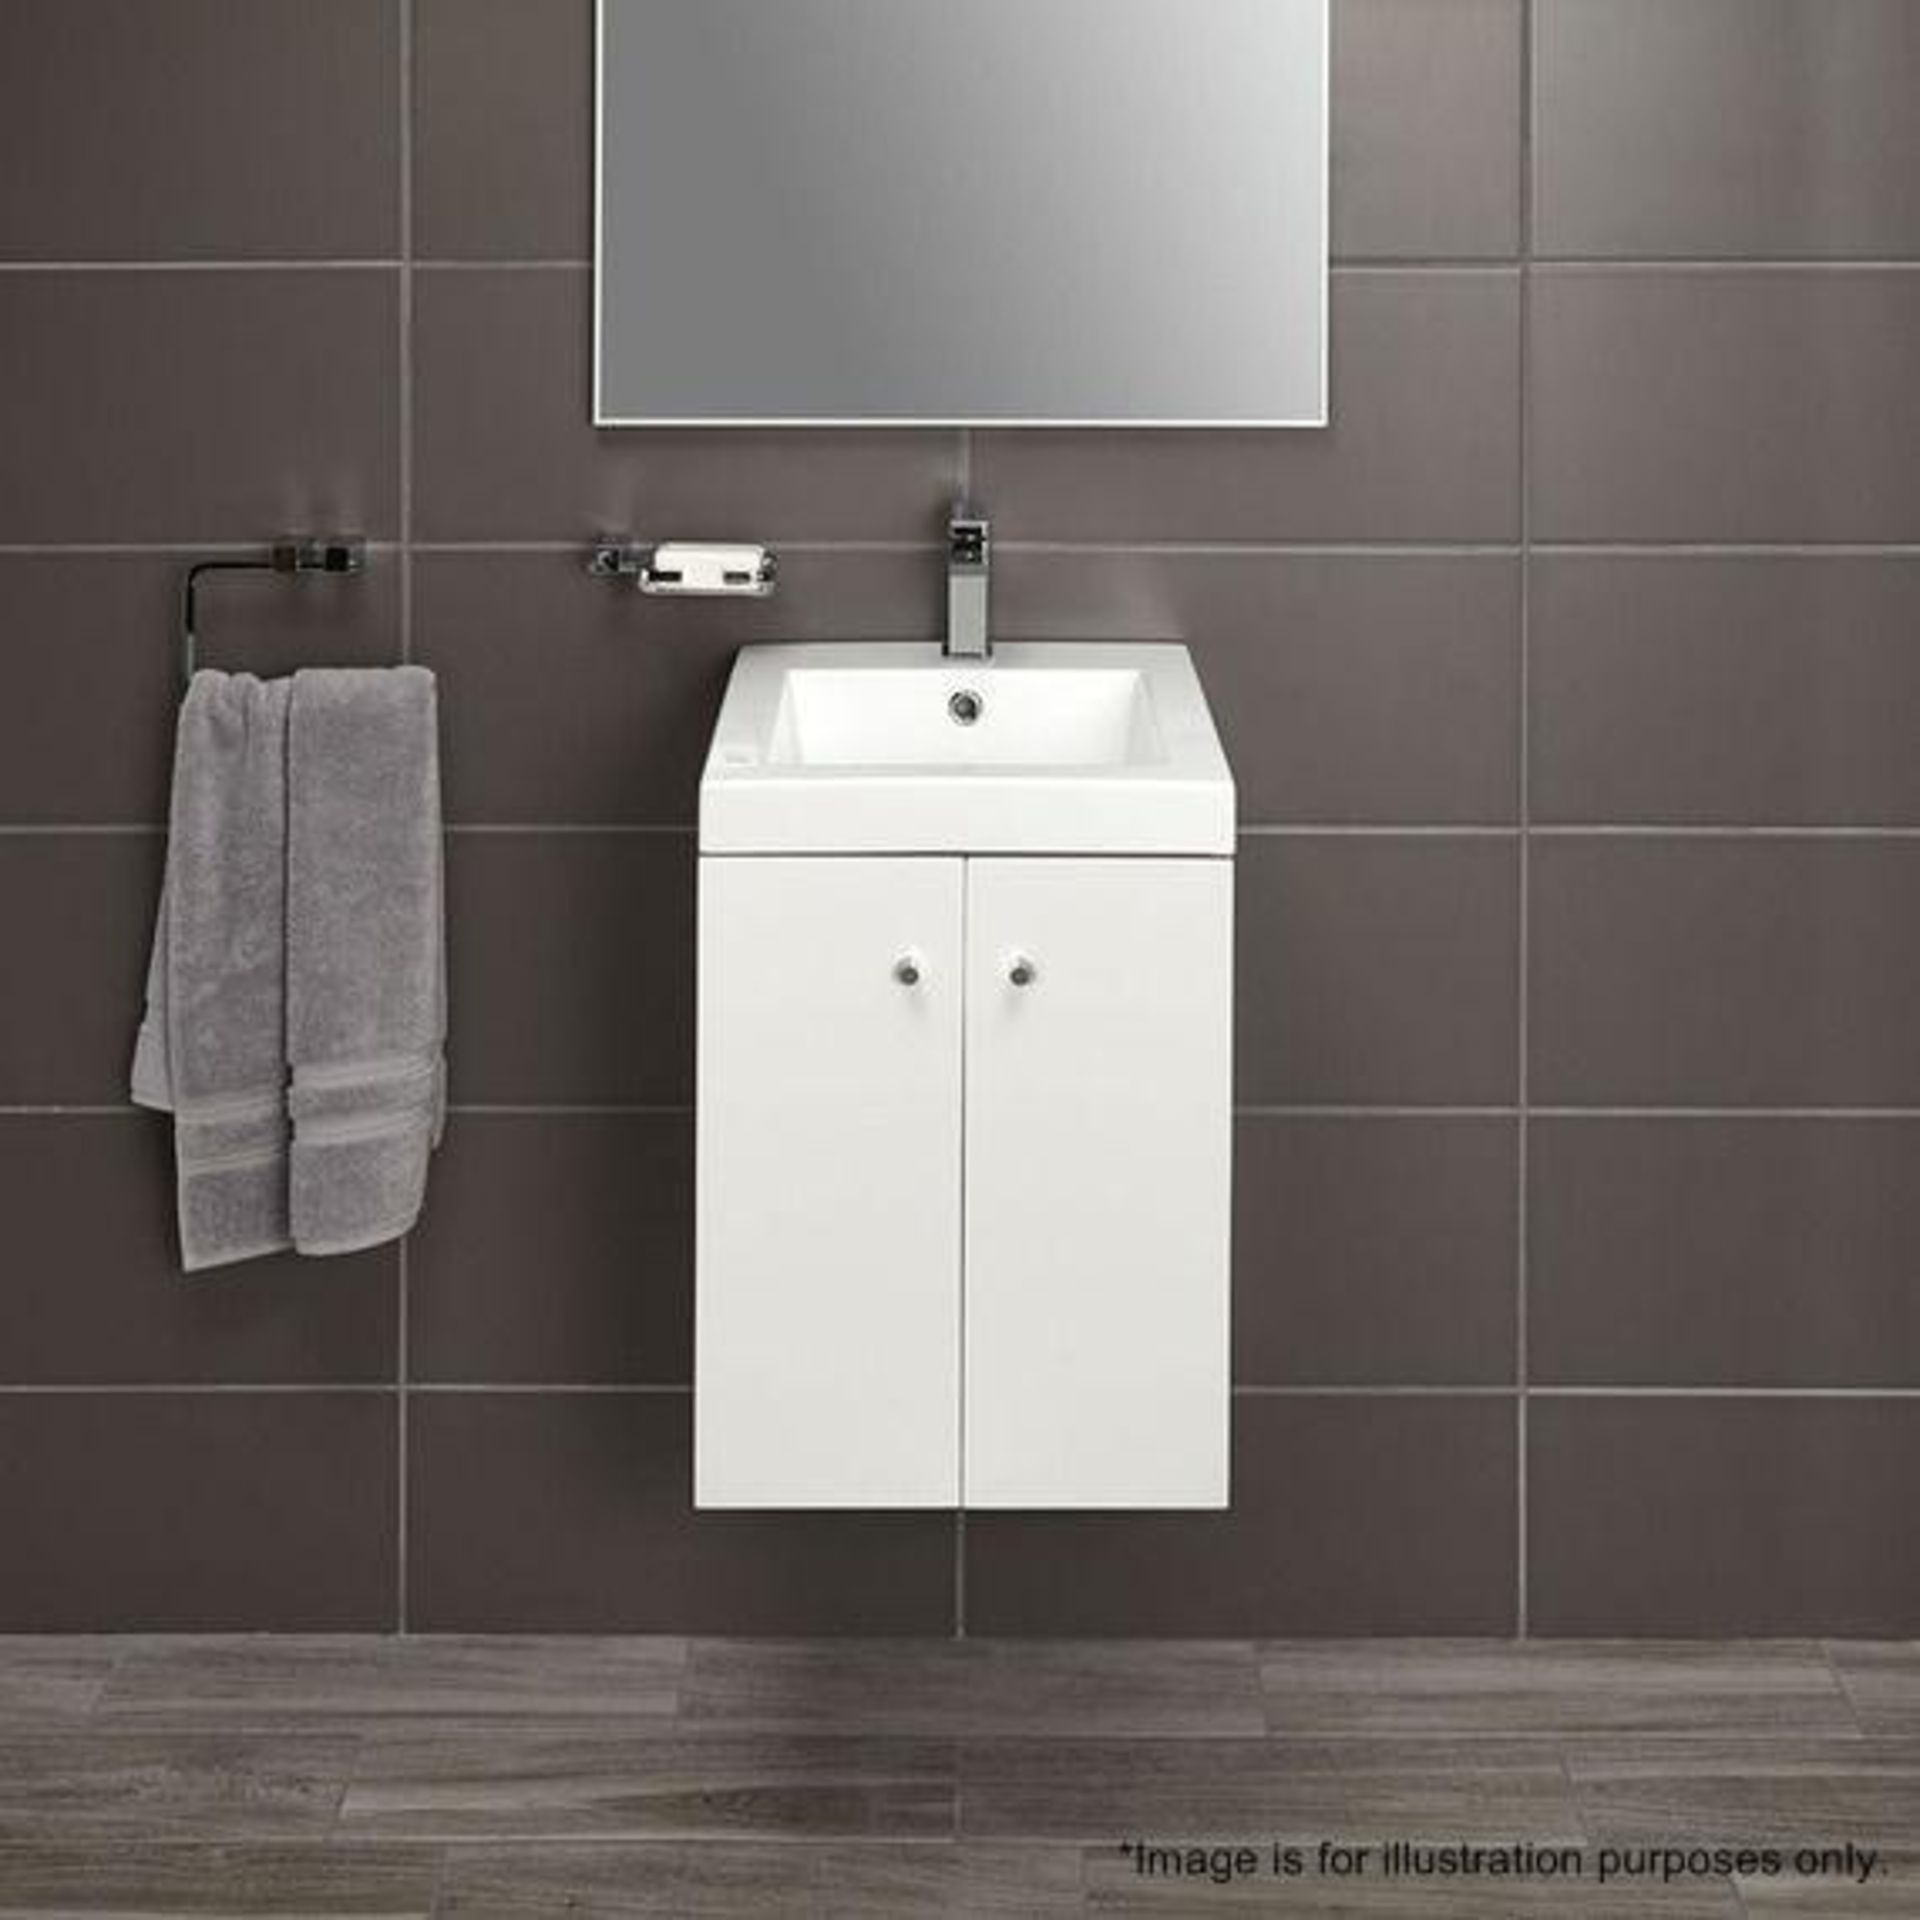 5 x Alpine Duo 400 Wall Hung Vanity Units In Gloss White - Brand New Boxed Stock - Dimensions: H49 x - Bild 3 aus 5